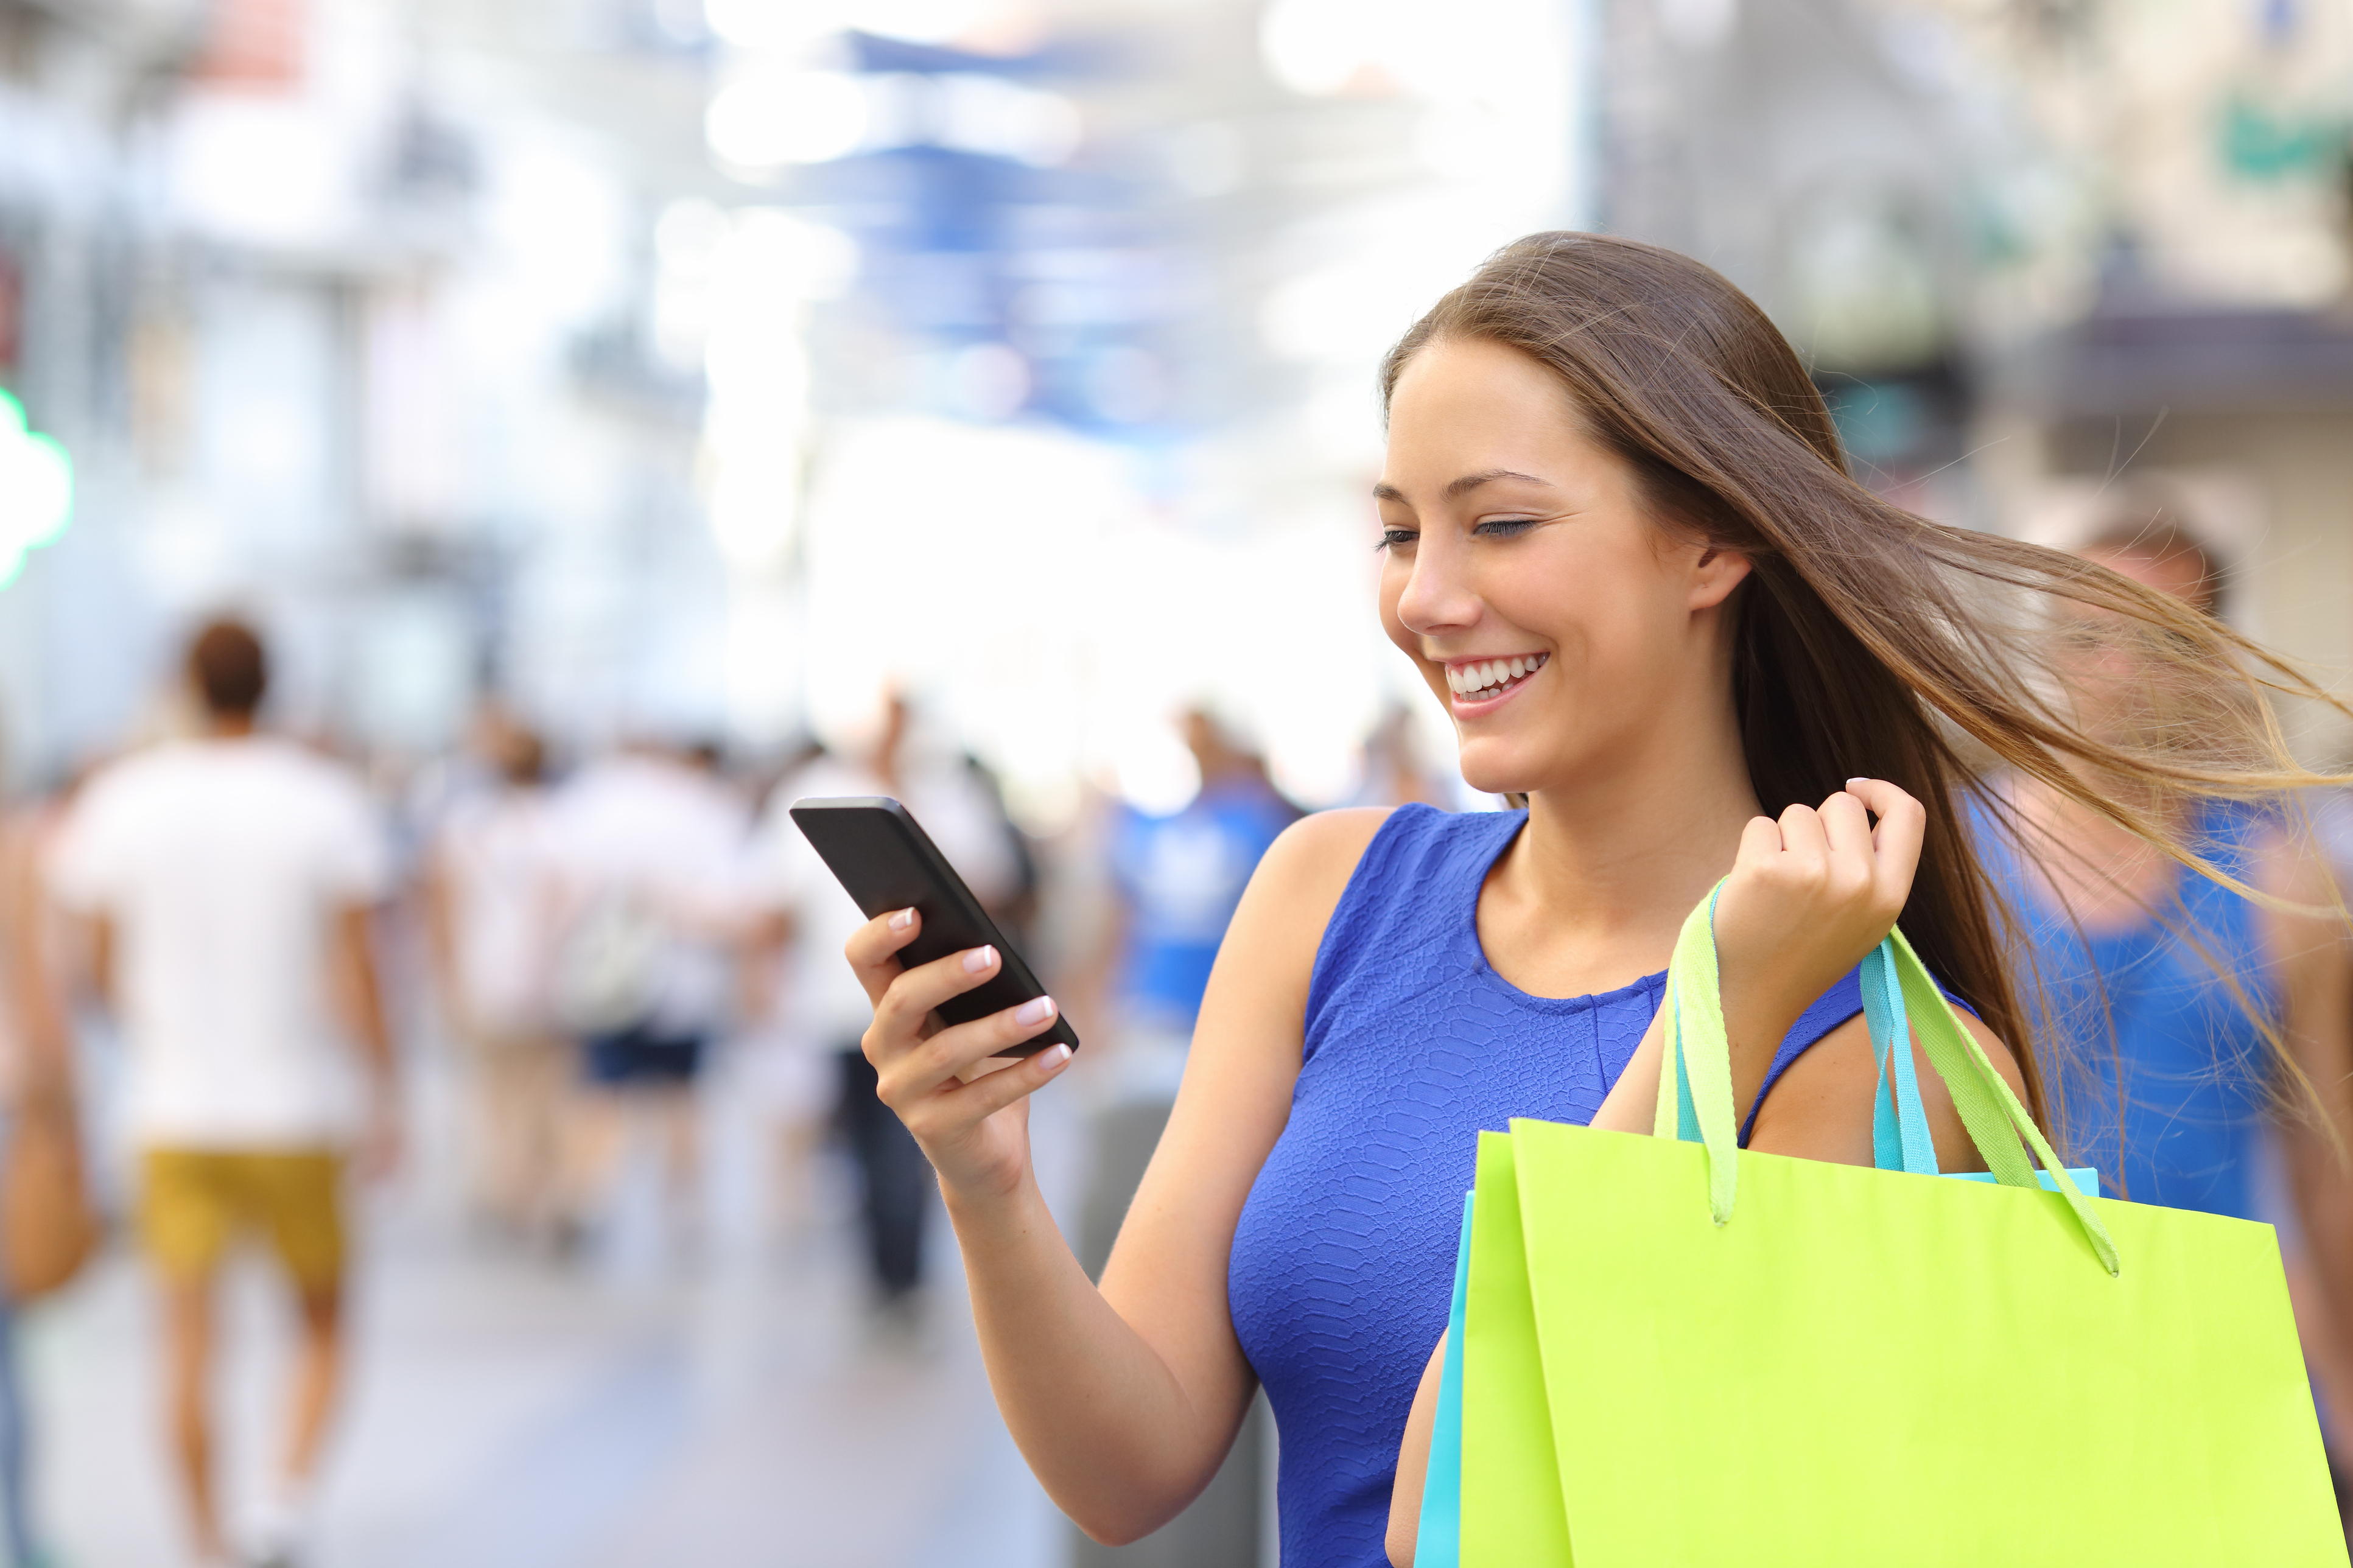 Shopper shopping with smartphone in the street - Global Biz Circle